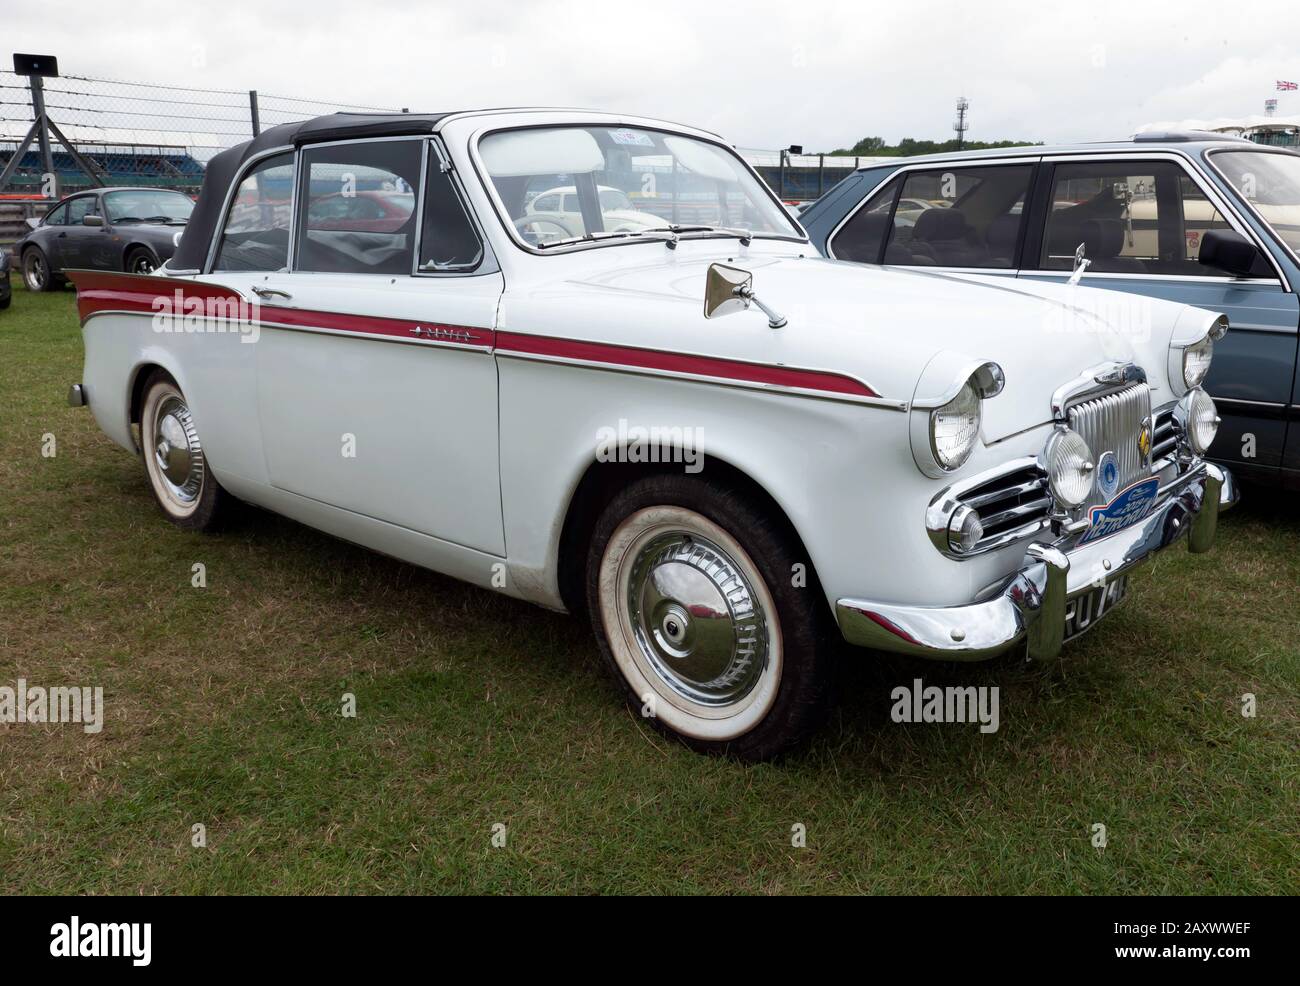 Three-quarter front view of a White, 1959, Sunbeam Rapier Series II, on display at the 2019 Silverstone Classic Stock Photo